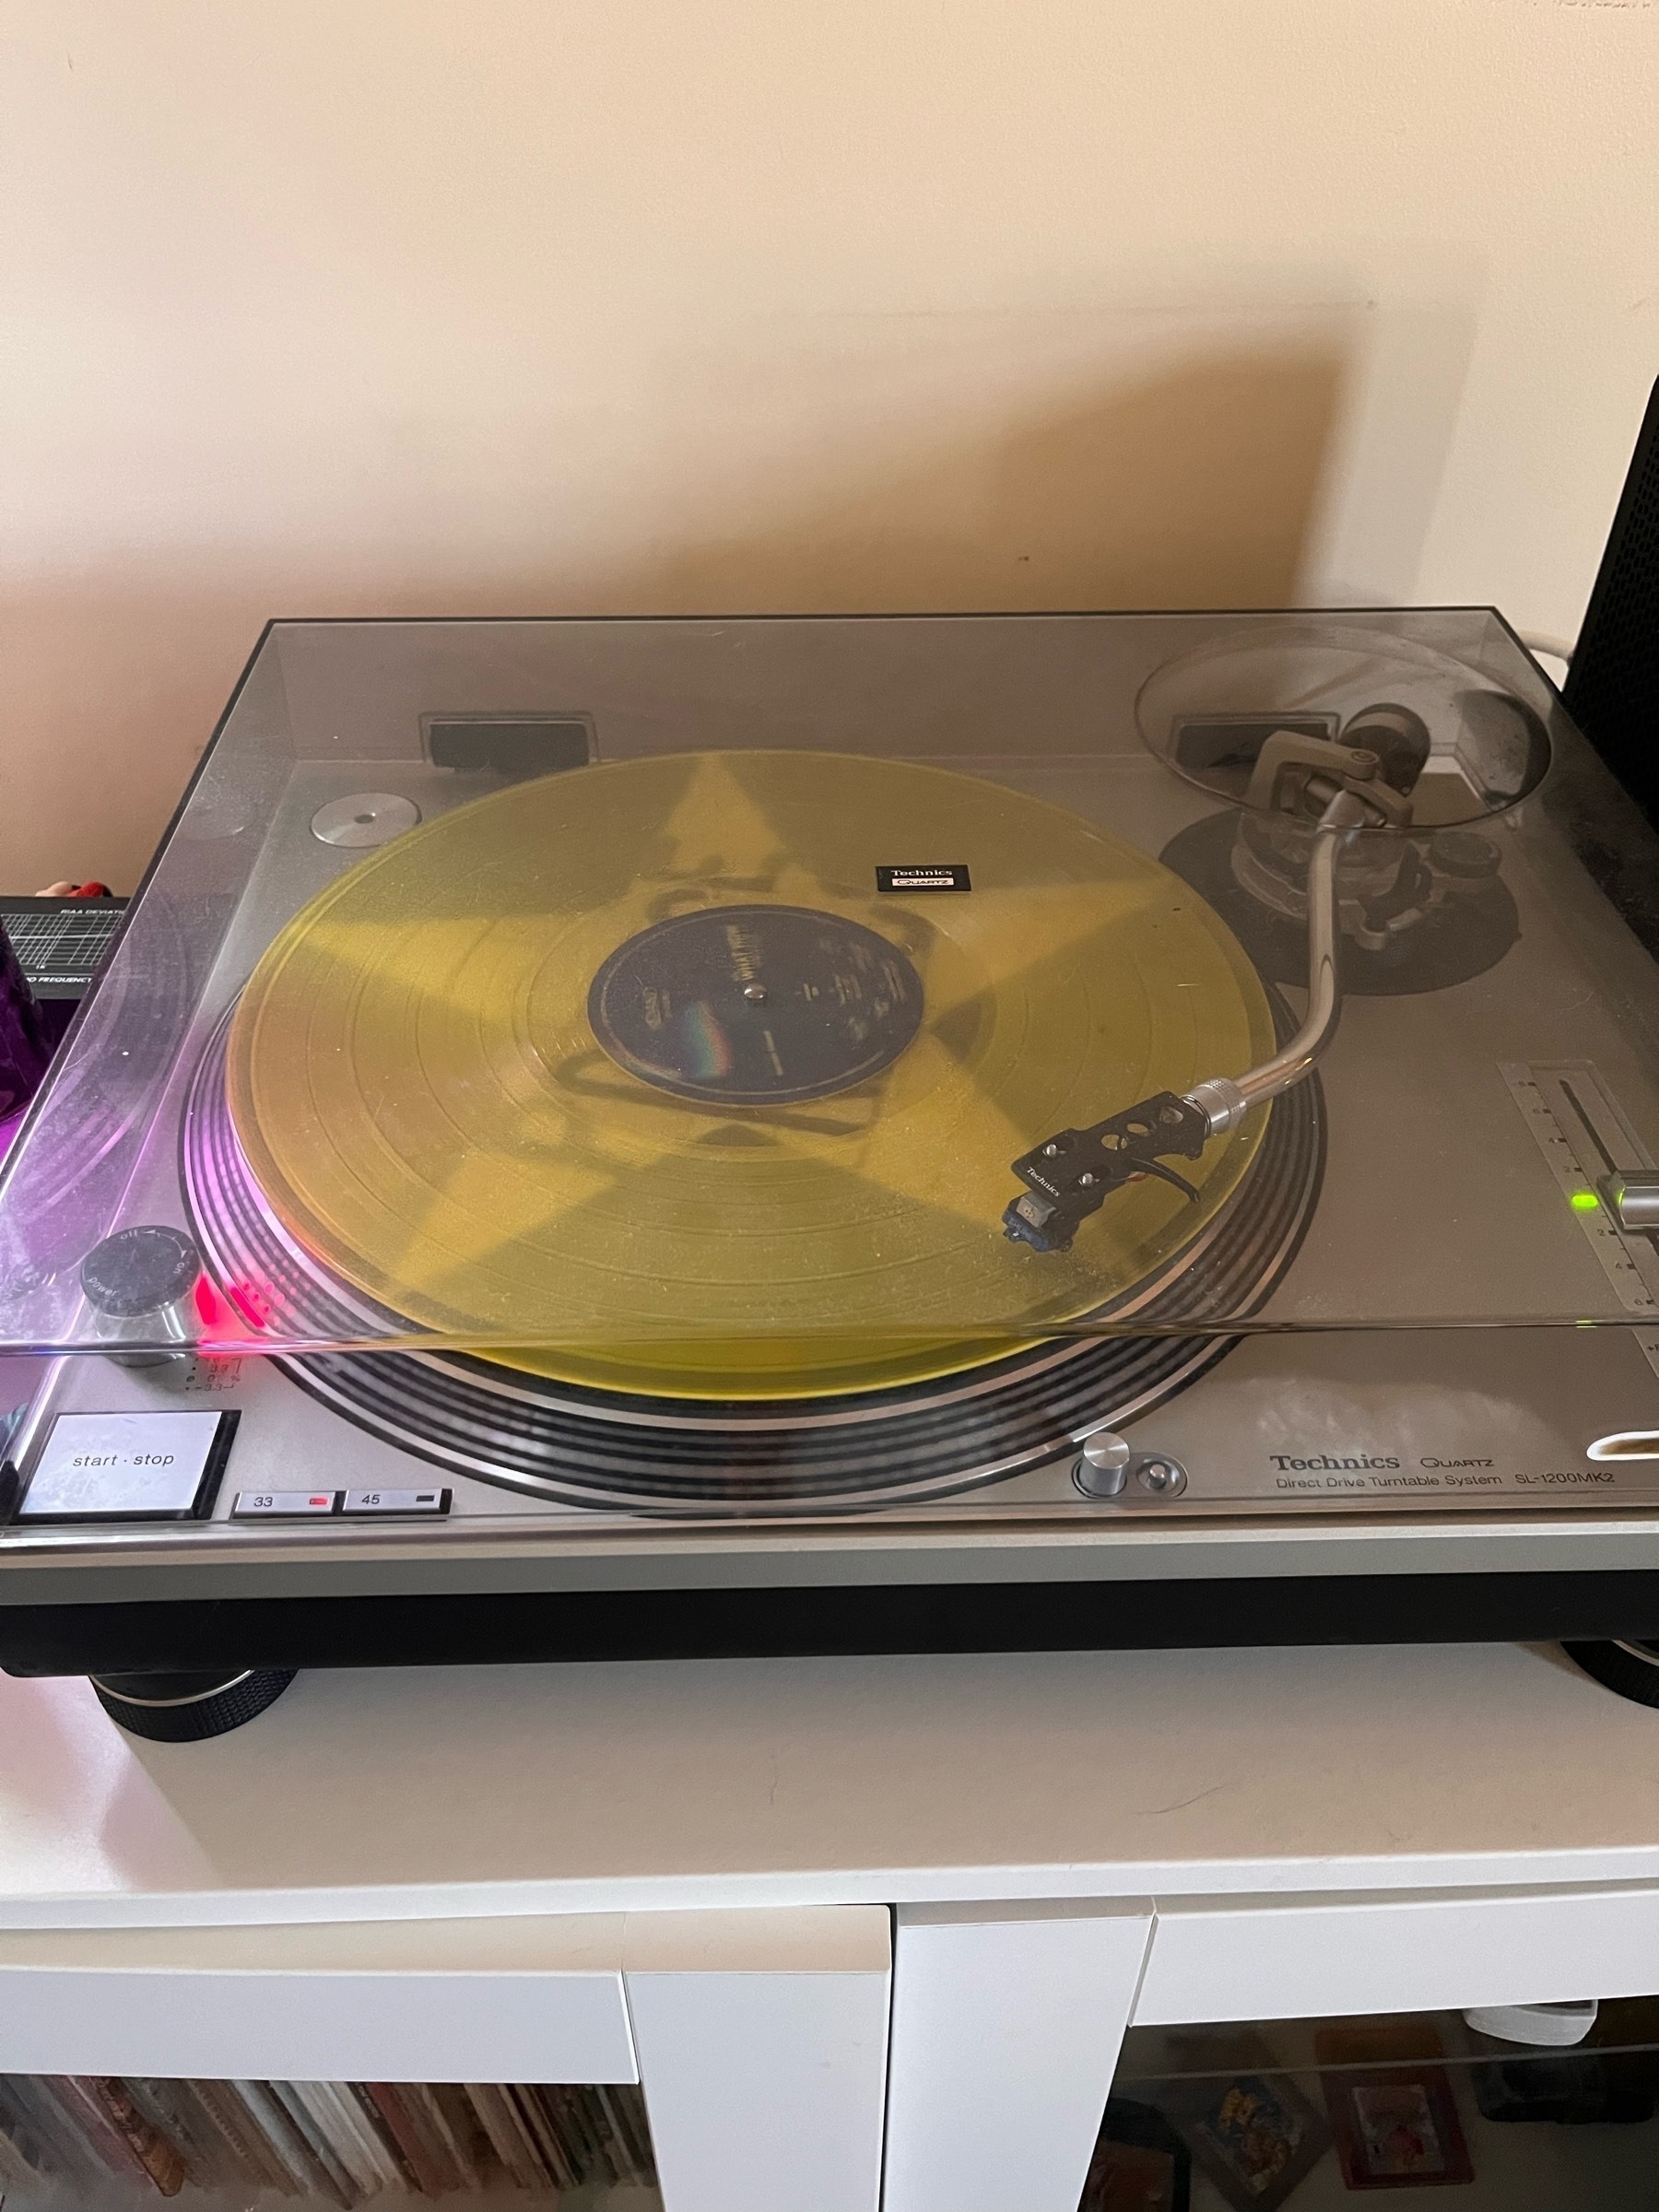 A record player with a clear yellow vinyl record playing on it. 